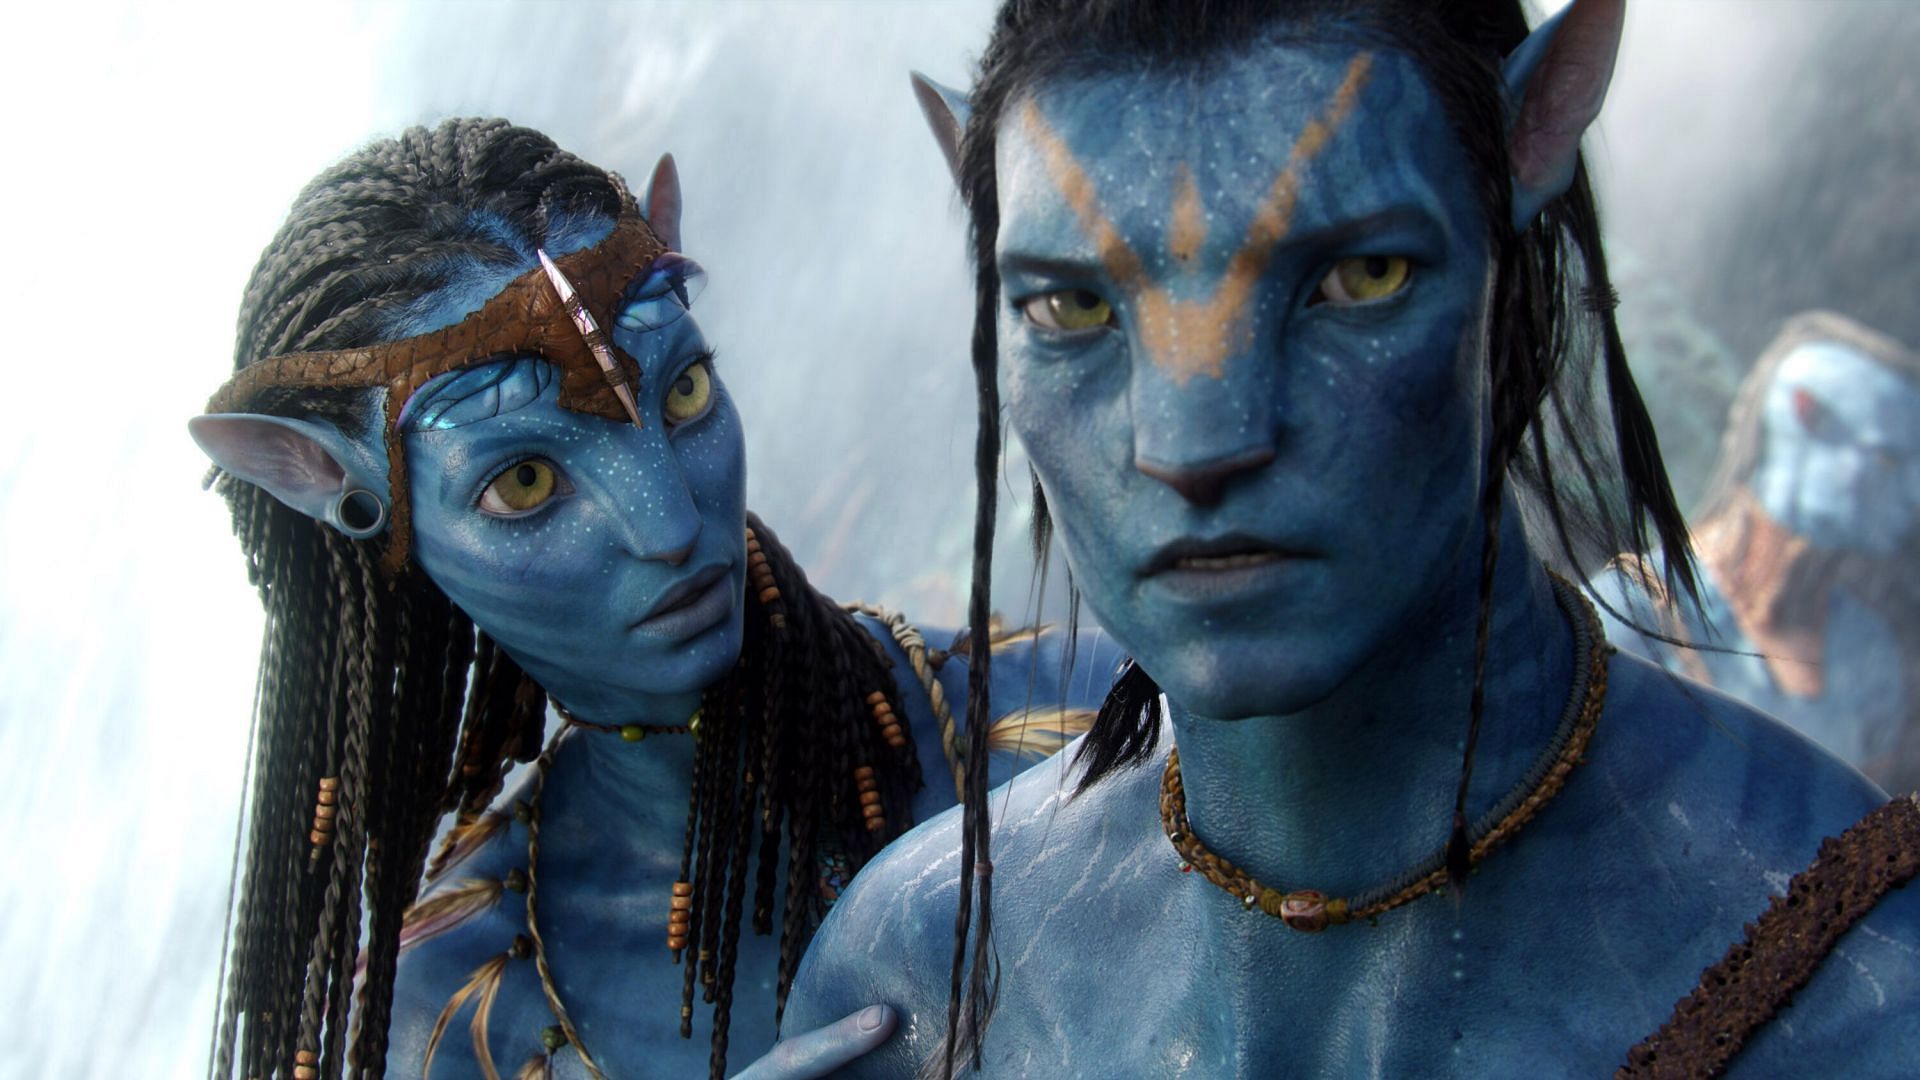 The highly anticipated Avatar 3 promises to introduce a new, fiery Na